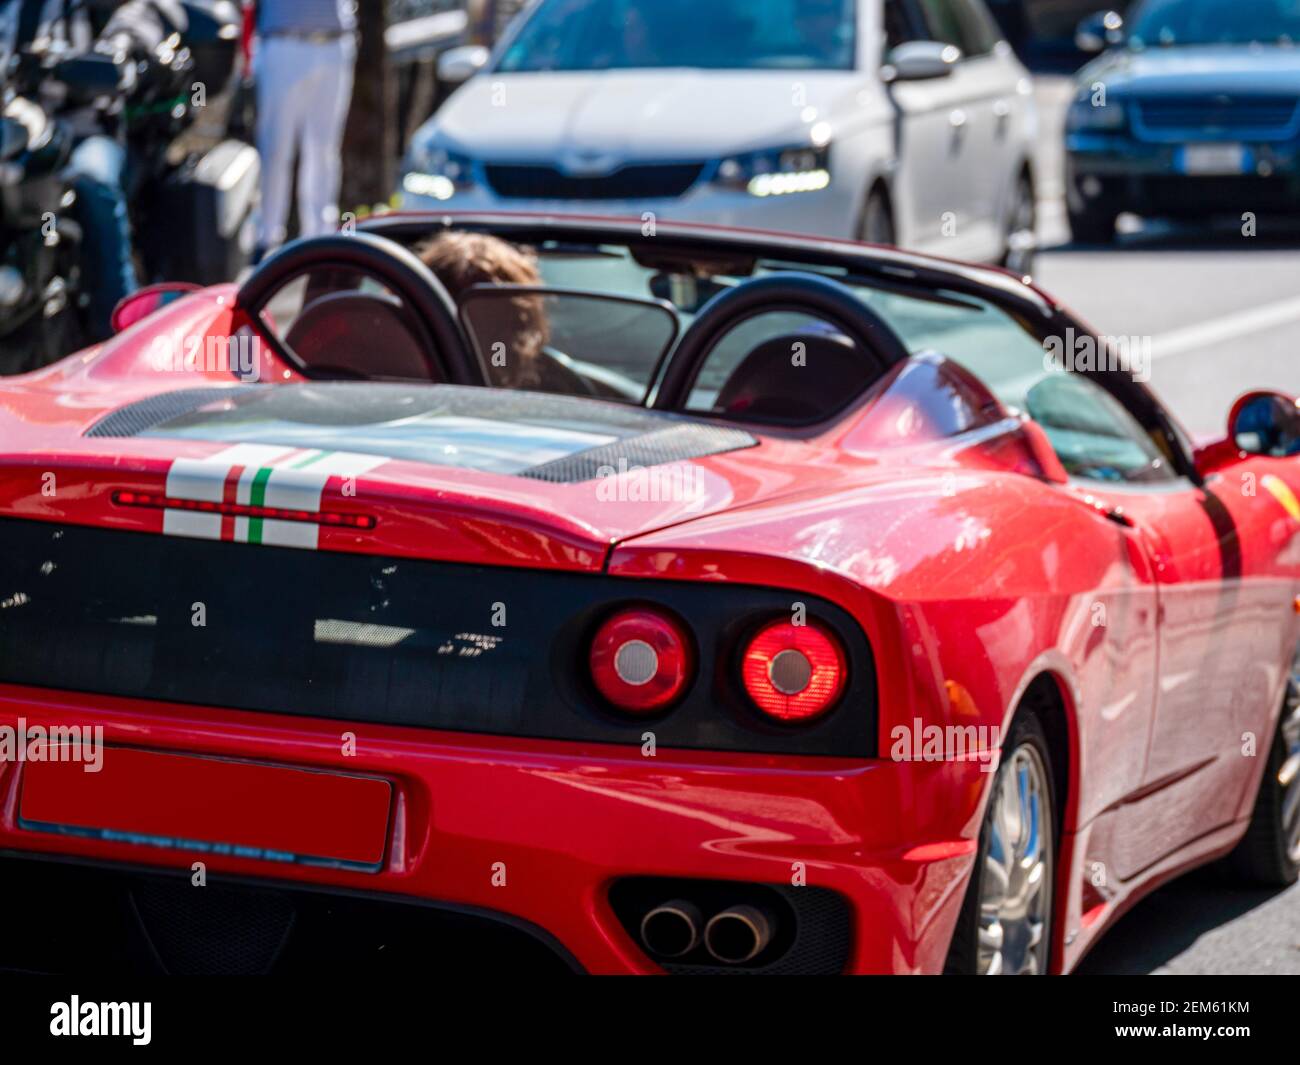 Red sports car in street traffic. Vintage style Stock Photo